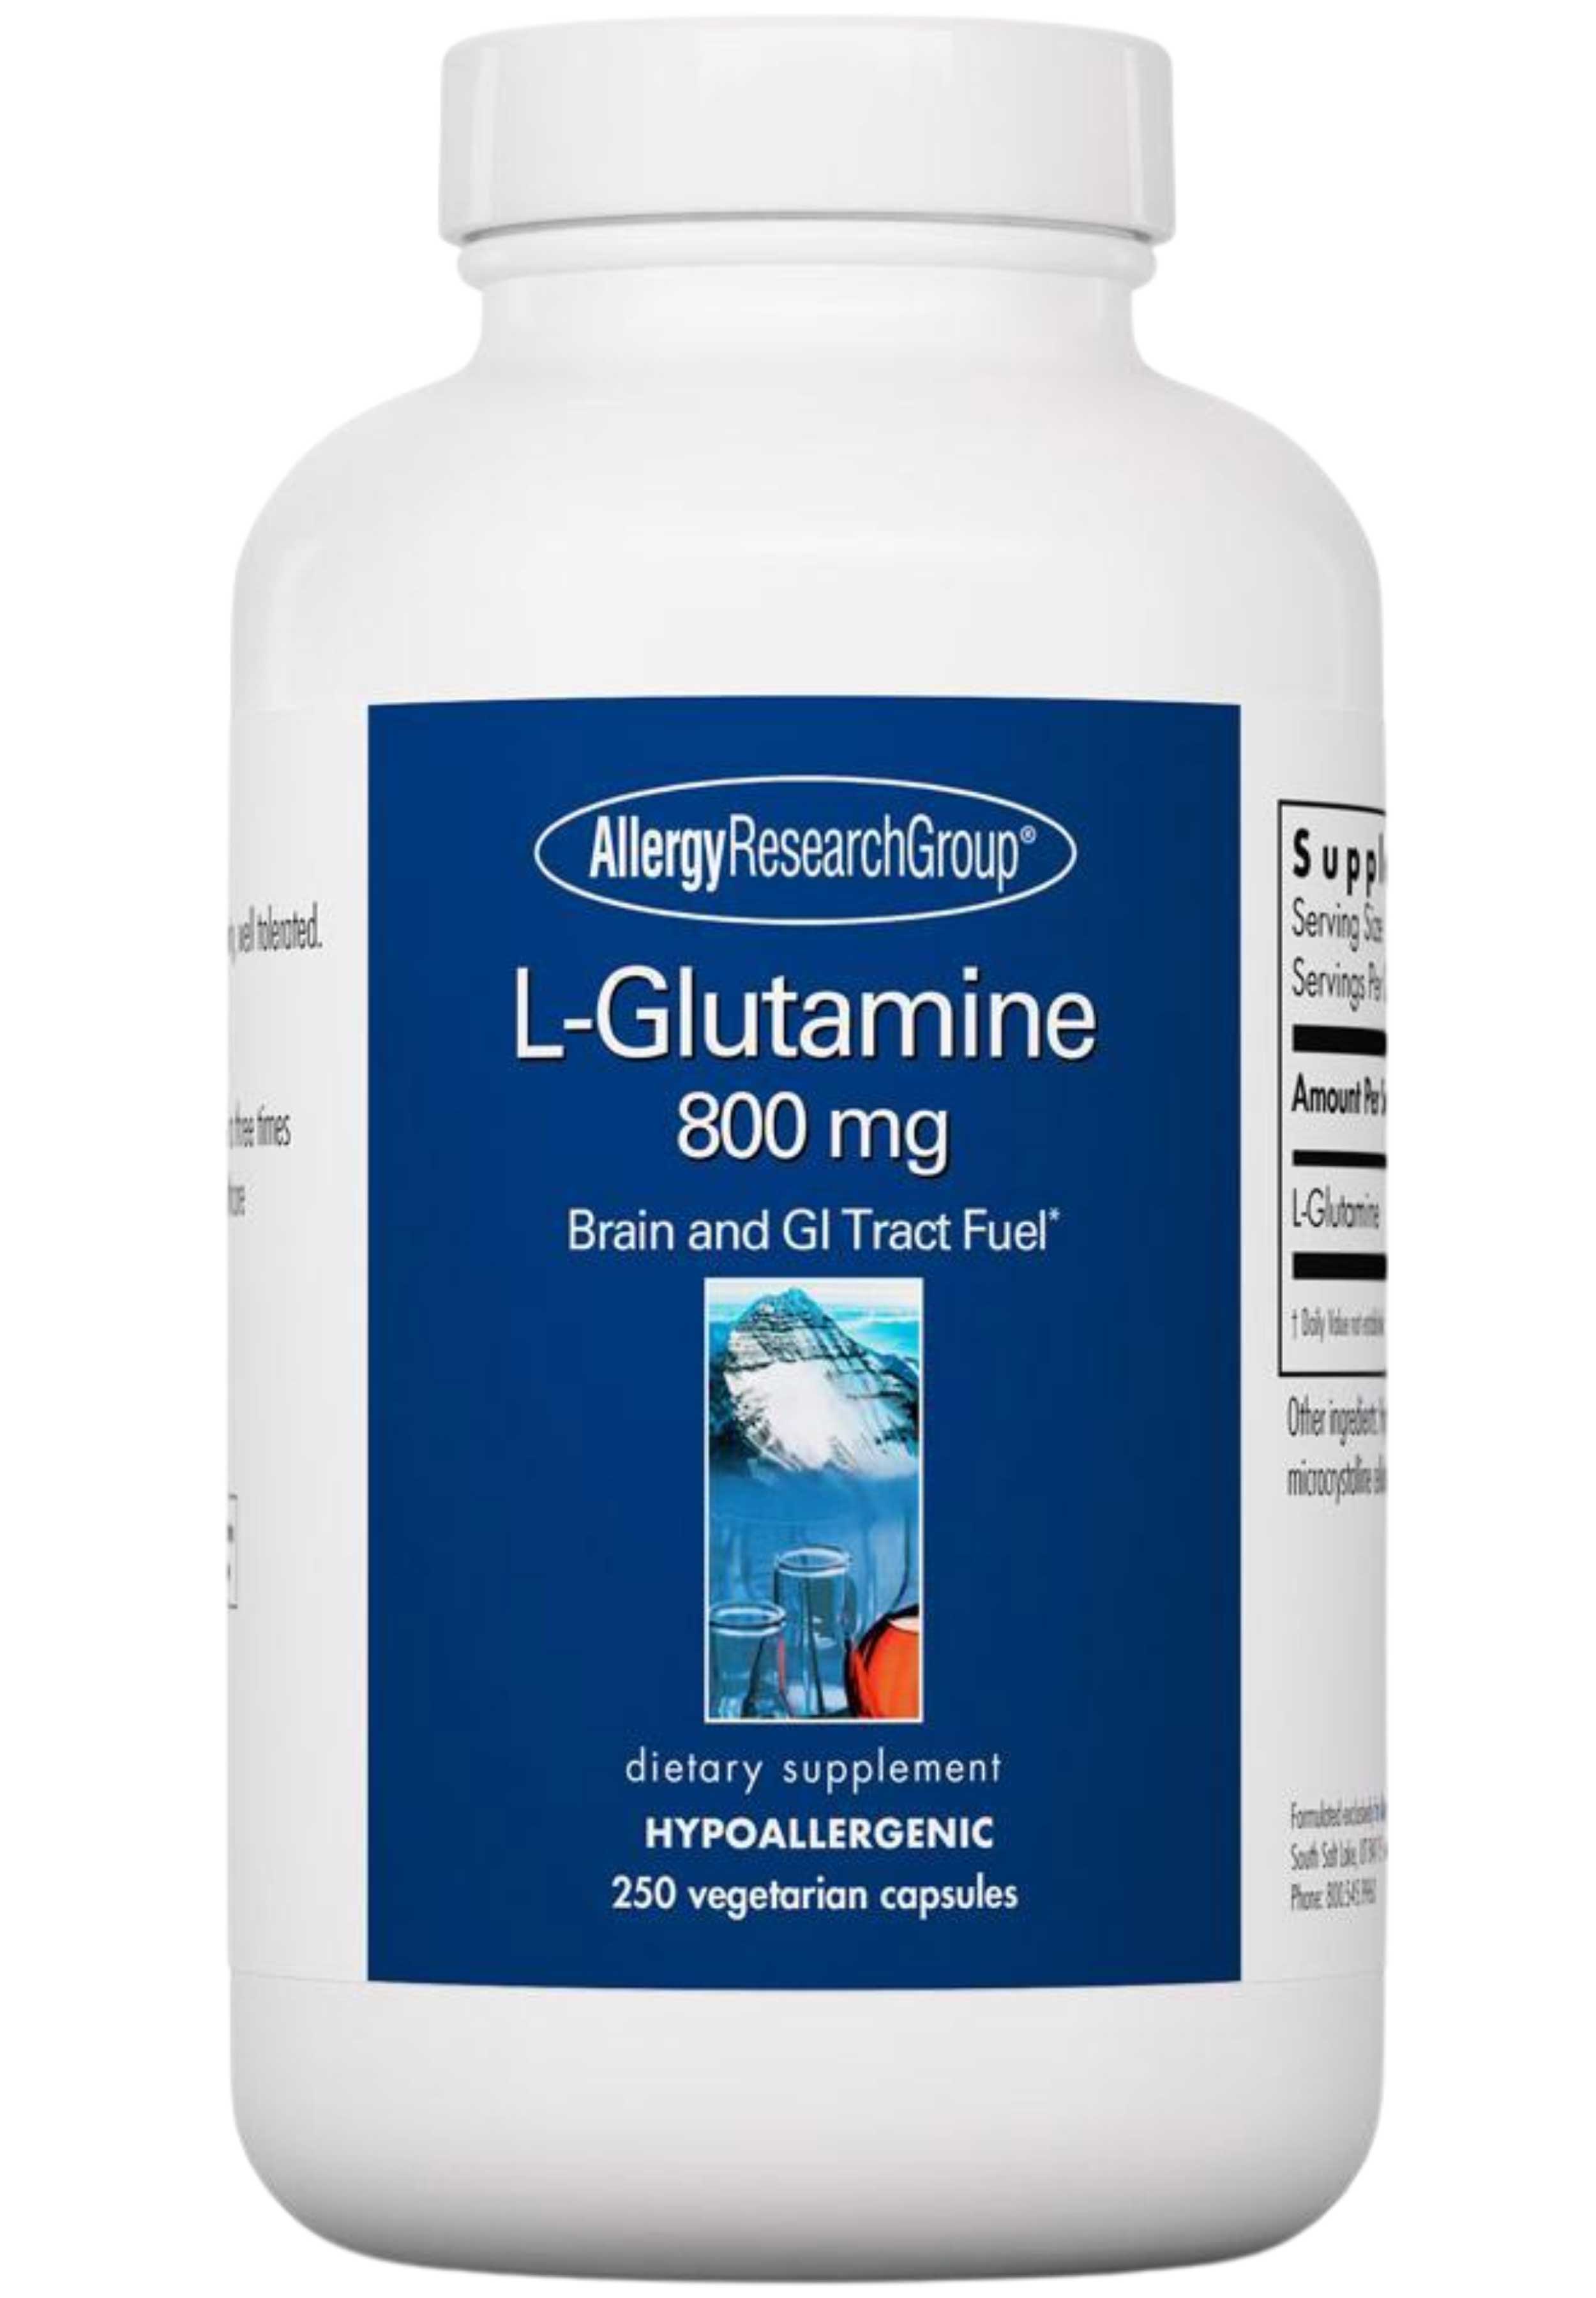 Allergy Research Group L-Glutamine 800 mg Capsules